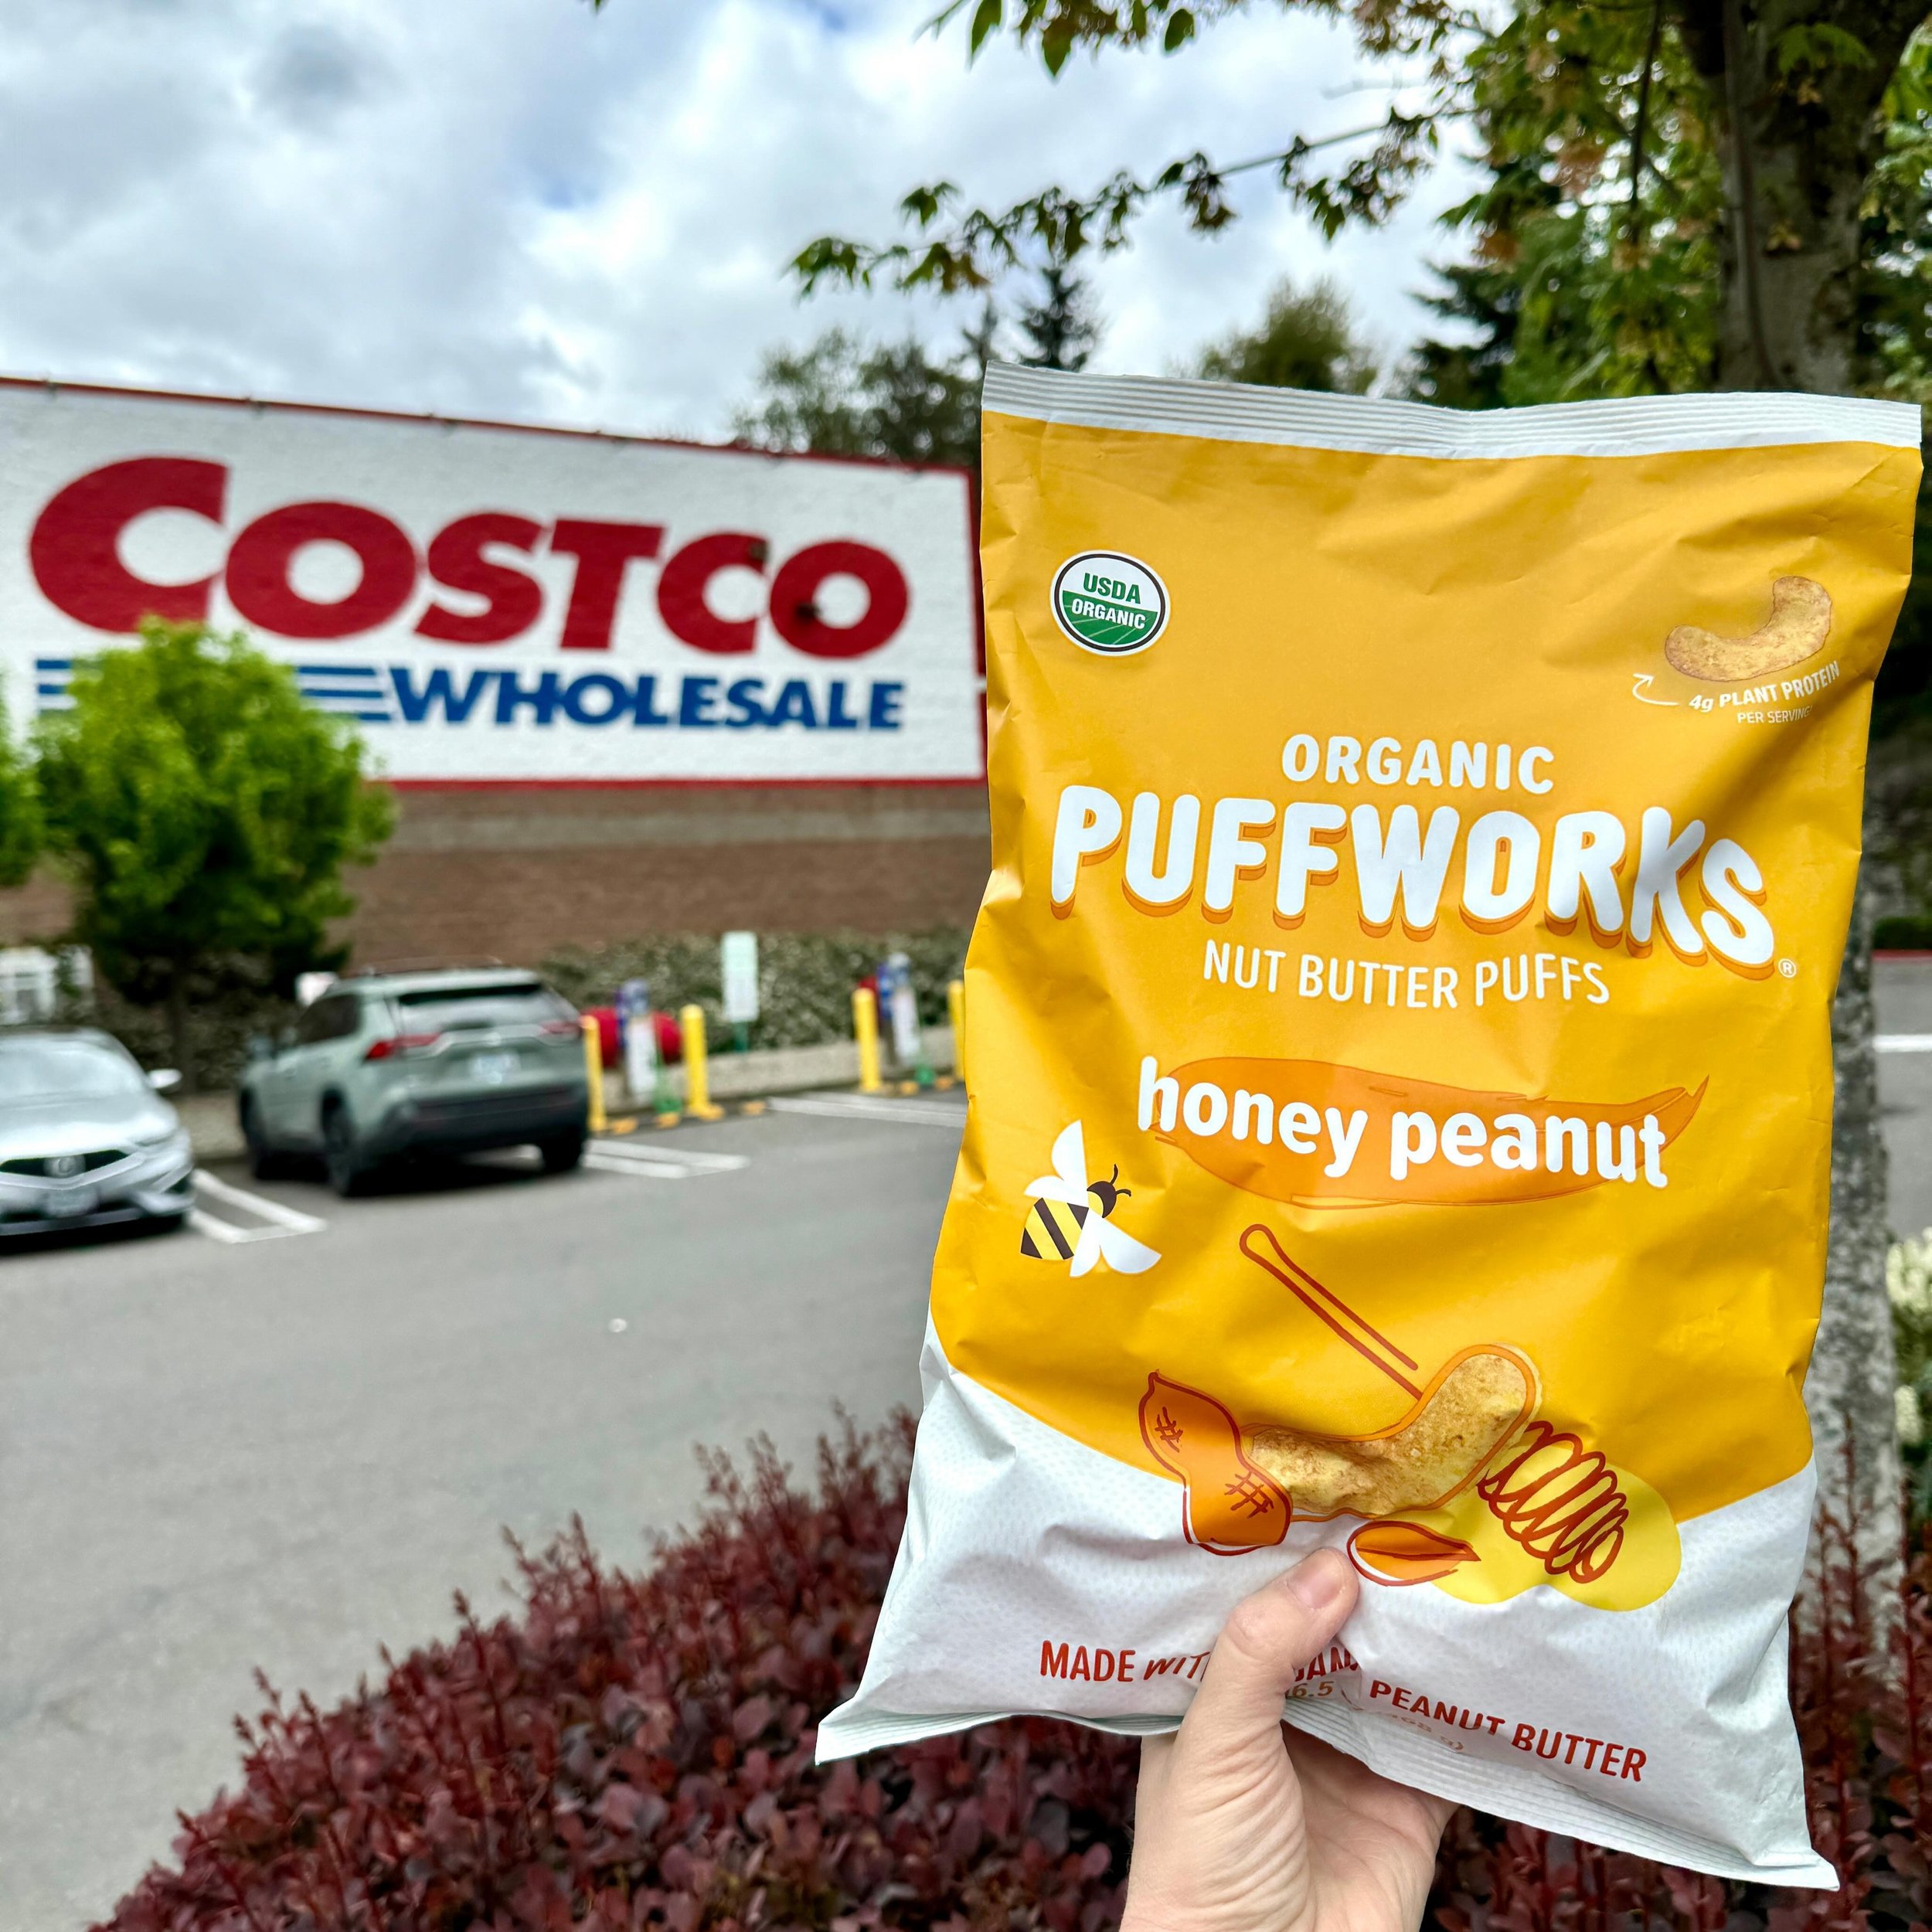 @puffworks now in Costco in the PNW! 🙌🙌🙌